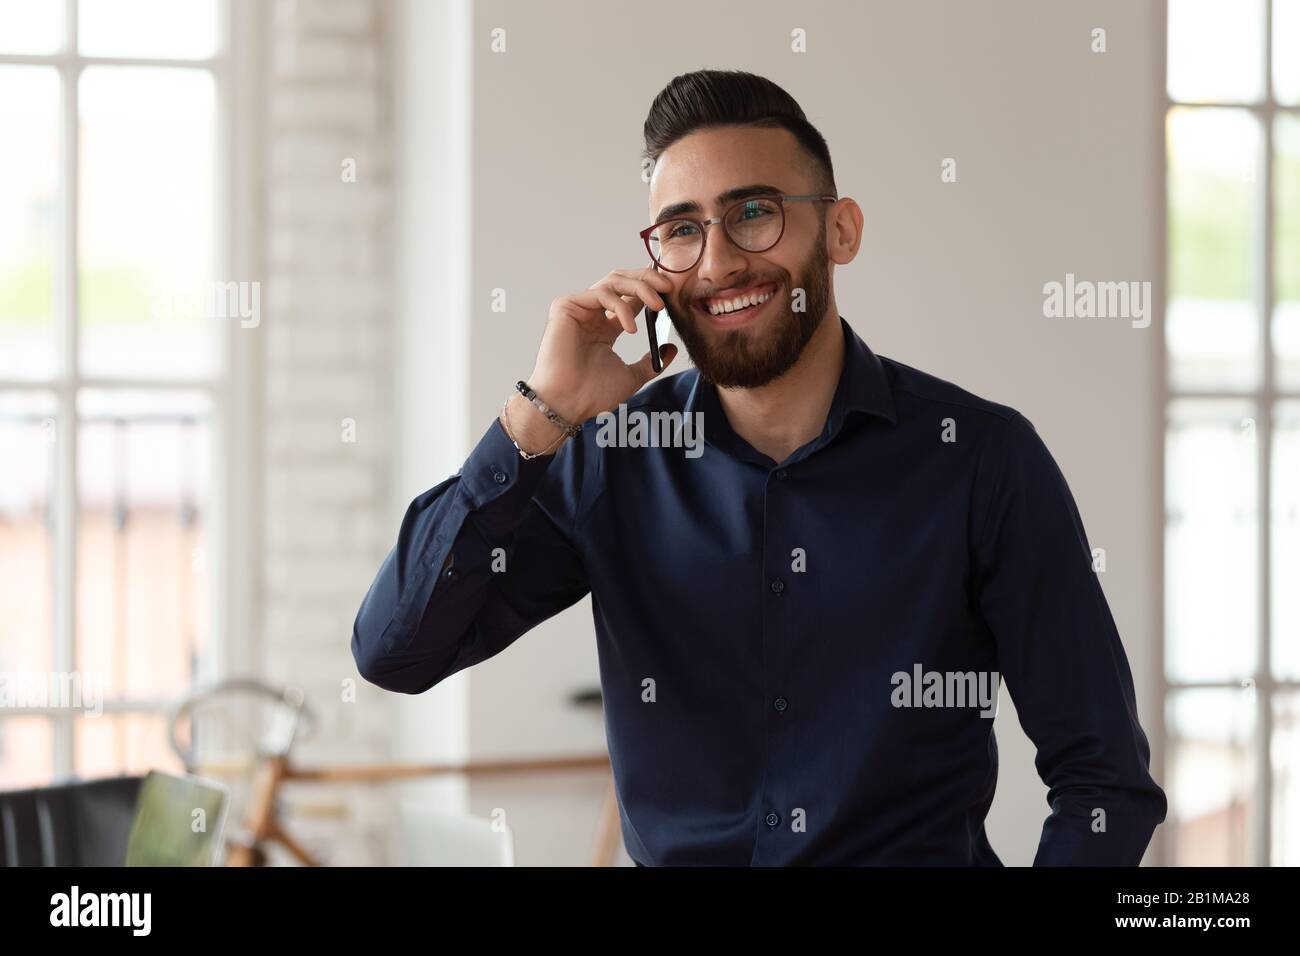 Millennial middle eastern ethnicity businessman talking on phone in office Stock Photo